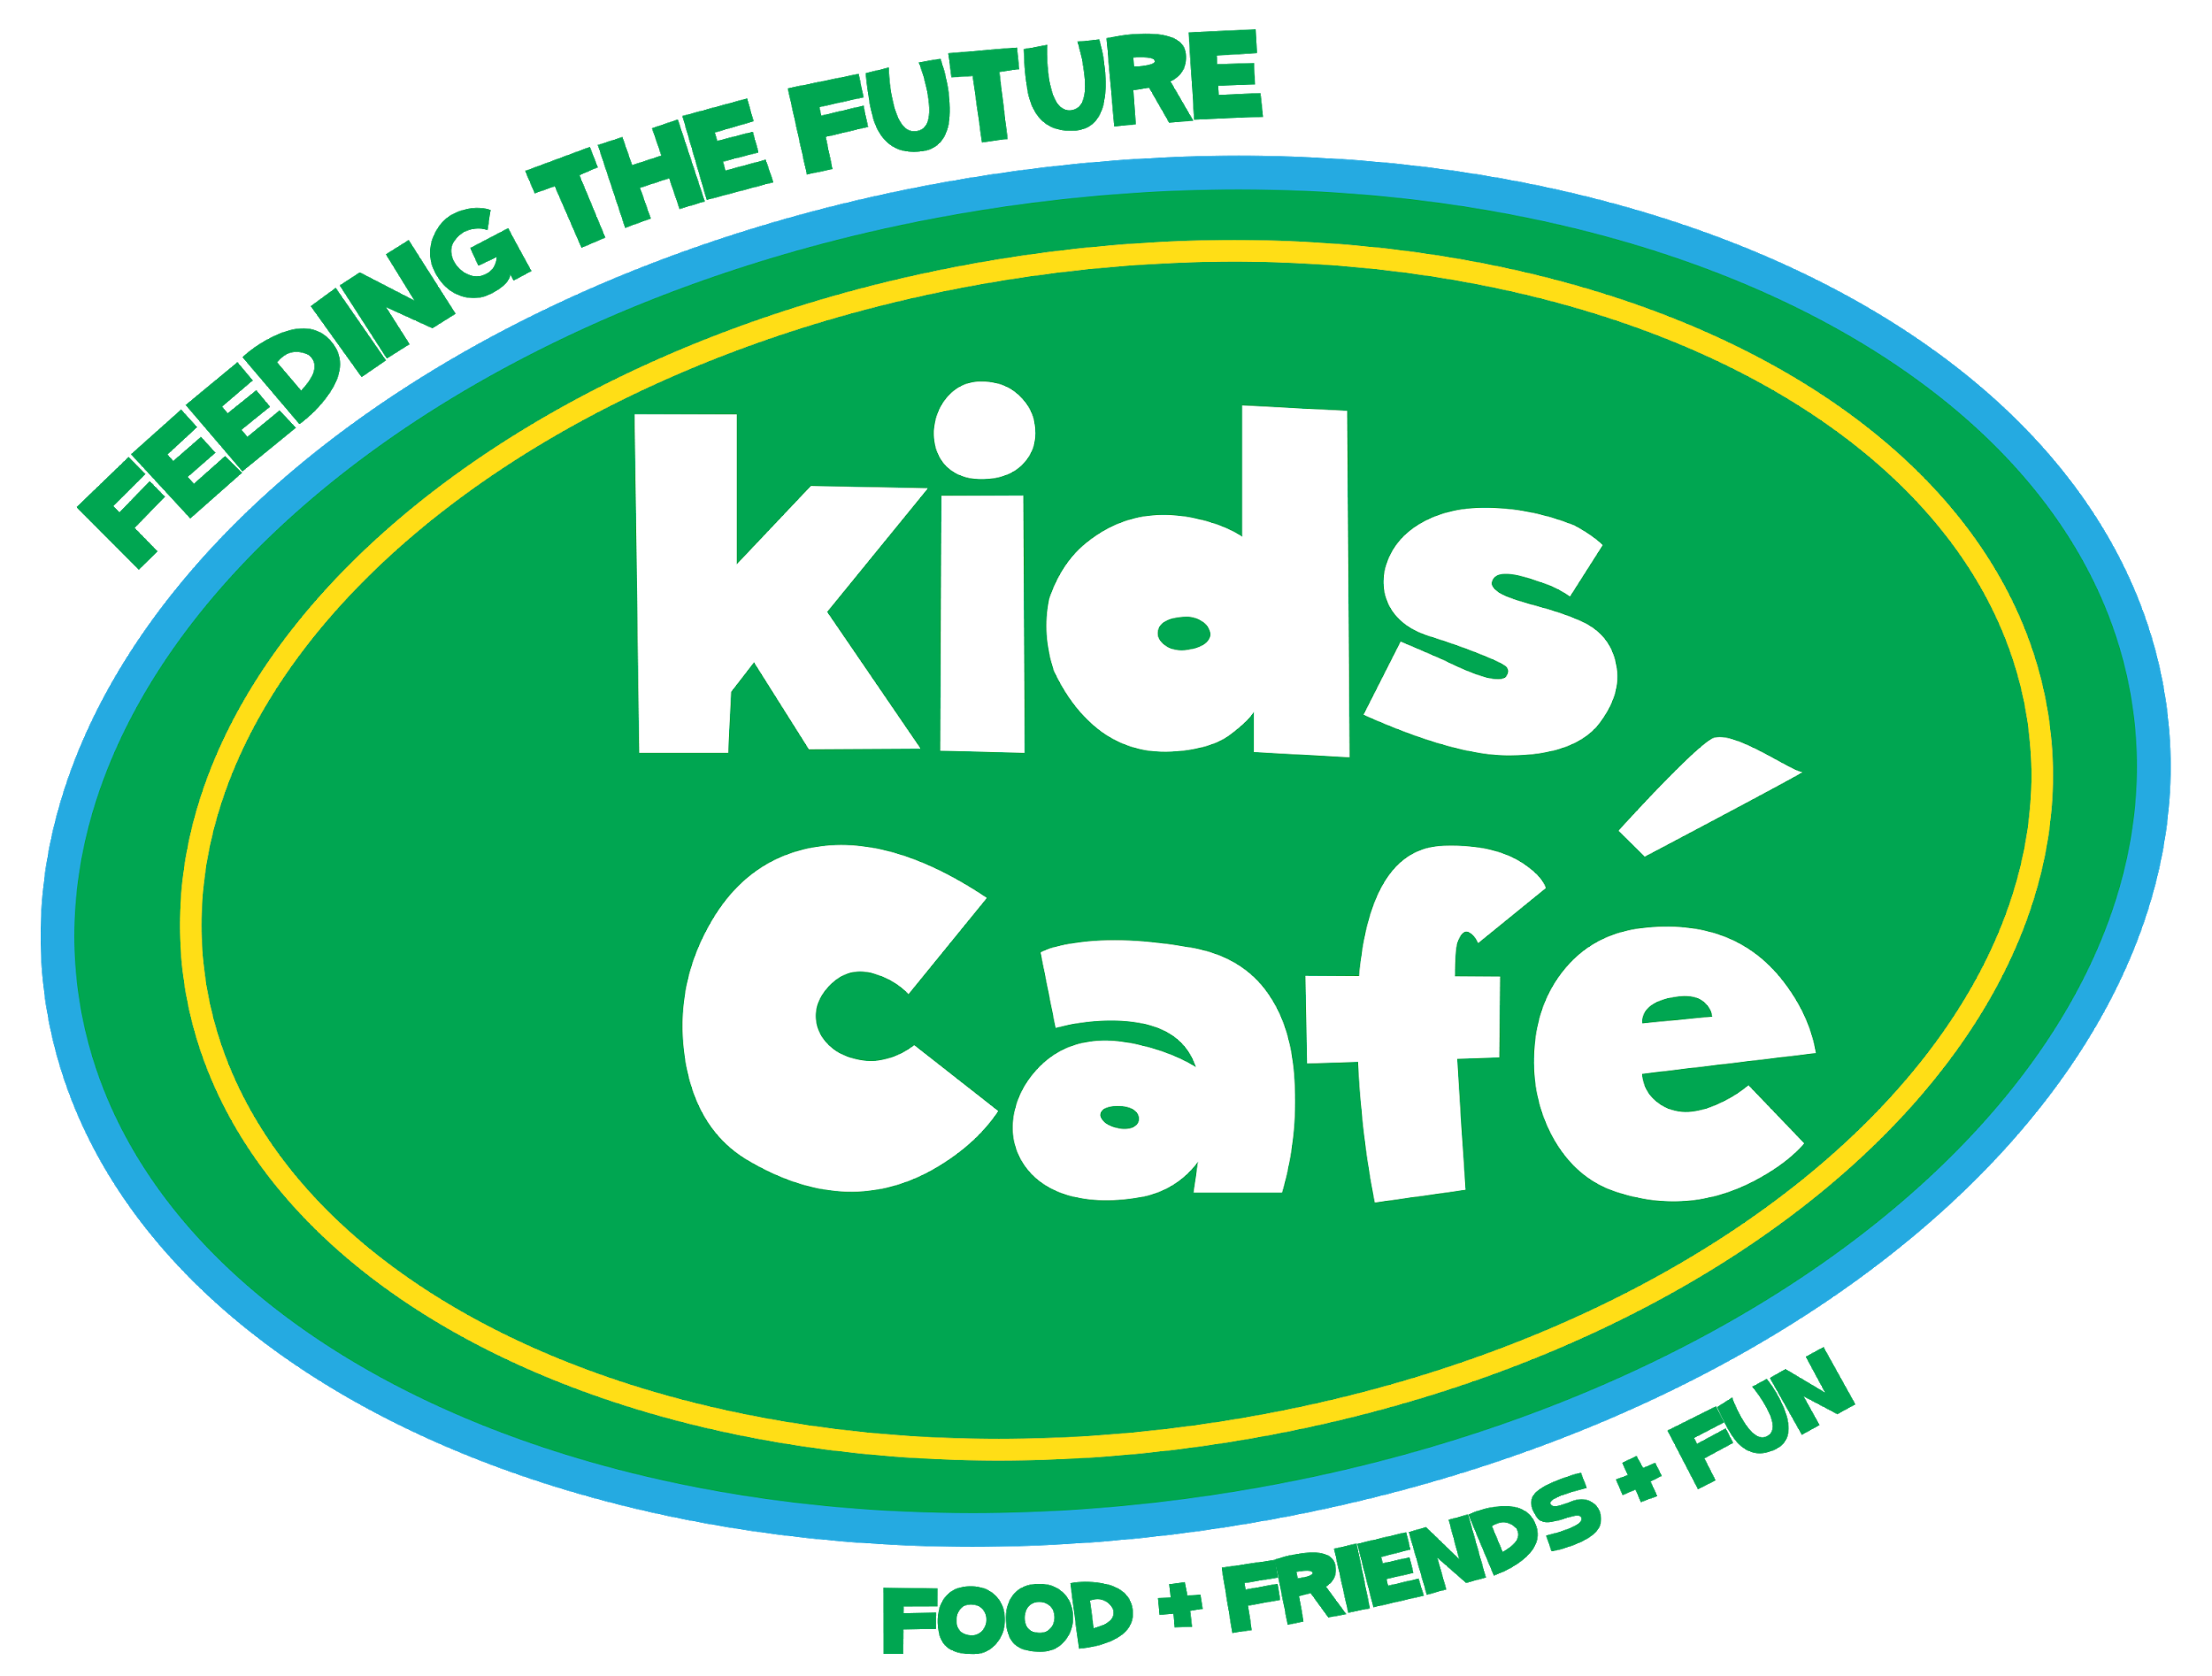 "kids Cafe" logo, white text on green oval, "FEEDING THE FUTURE", "Food Friends Fun", green text